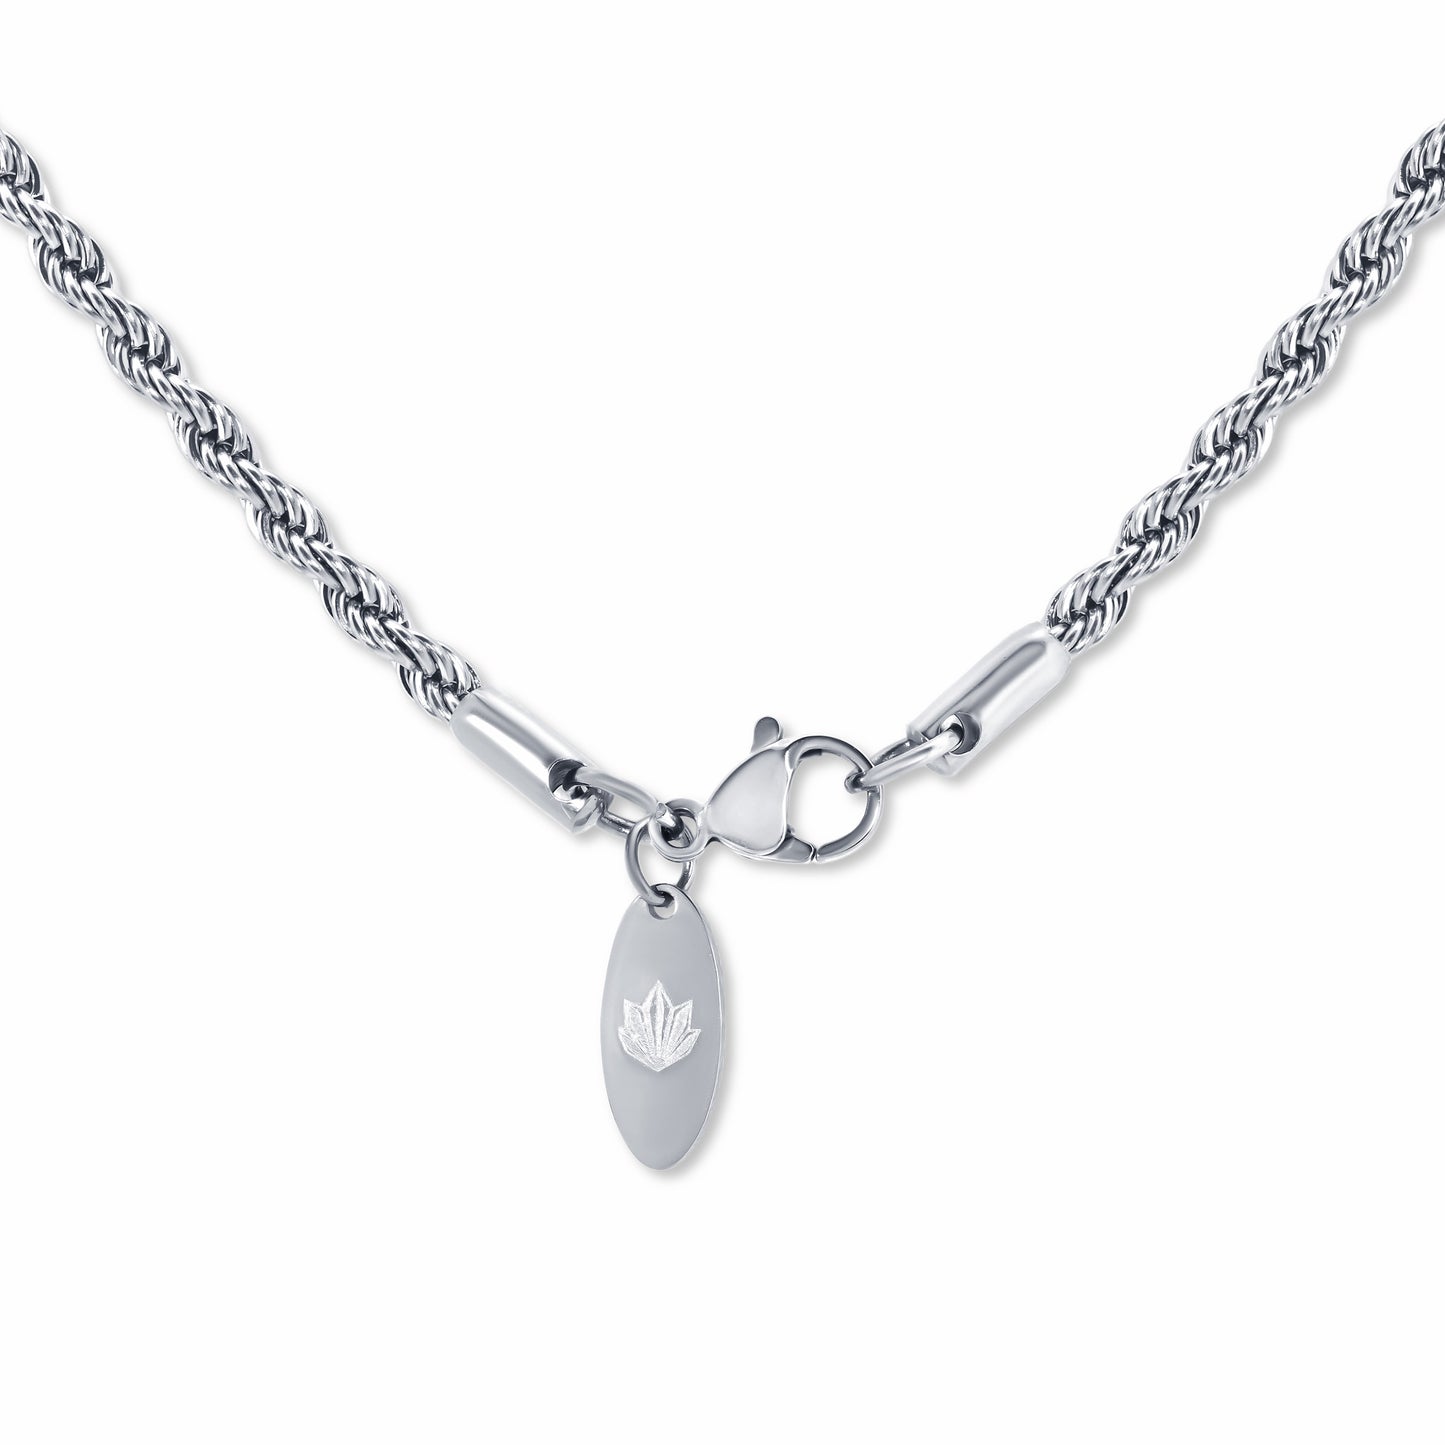 Rope Chain Silver 3mm clasp with engraved logo tag on a white background